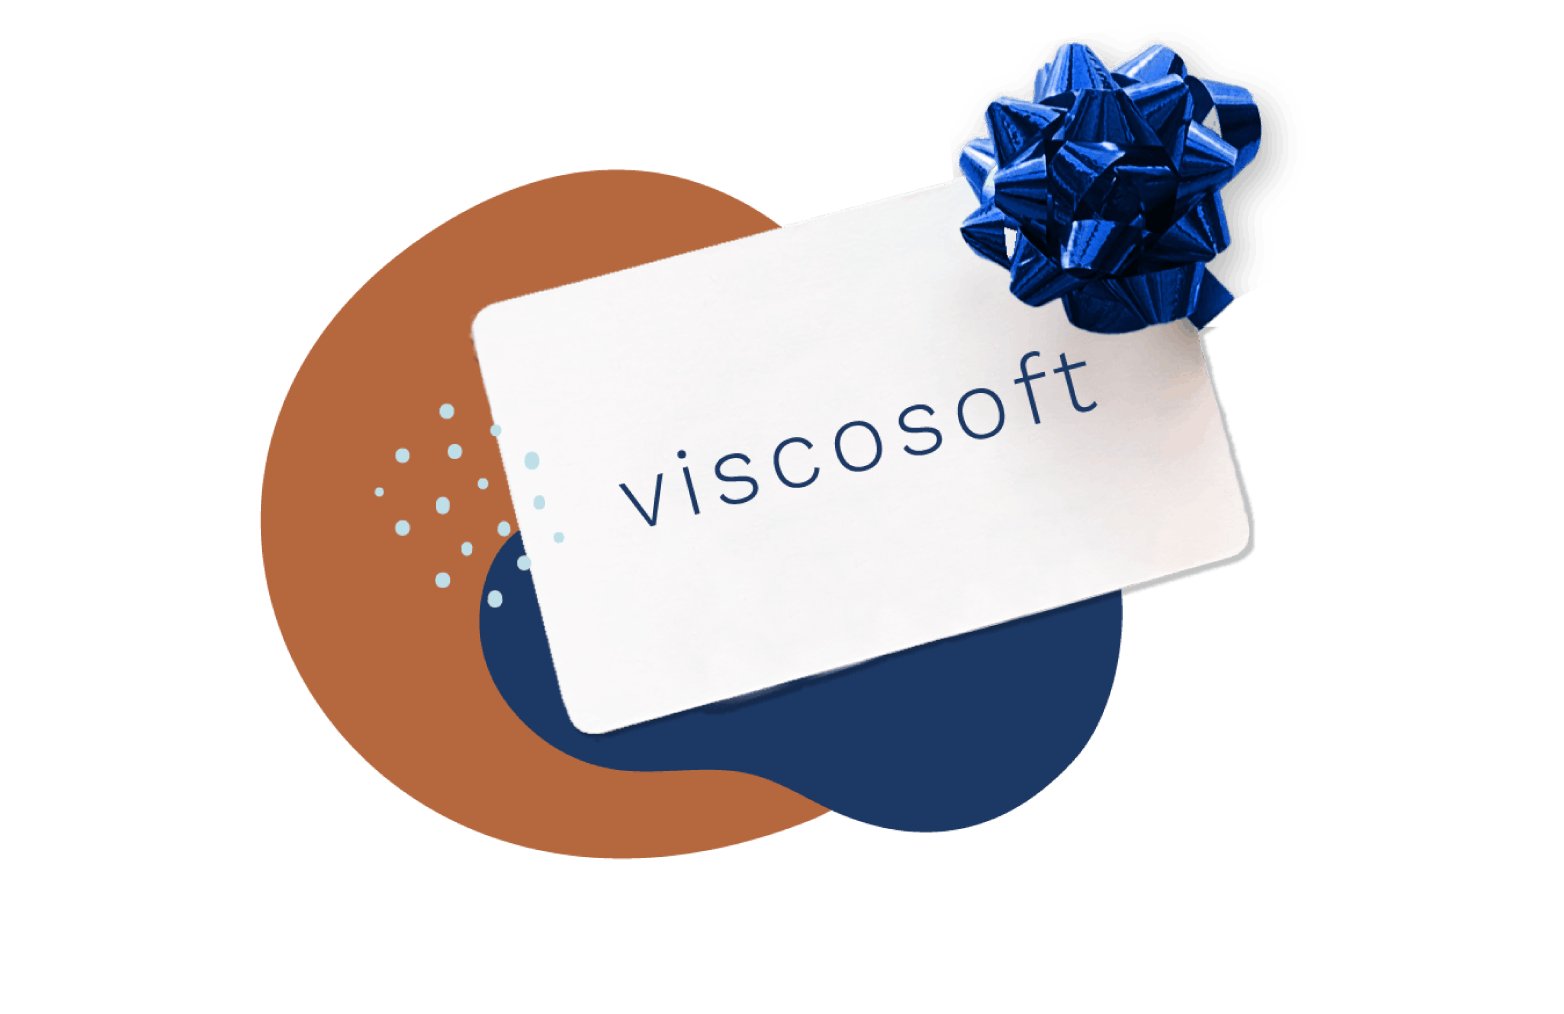 https://viscosoft.imgix.net/shopify/vs/gift-card/viscosoft-giftcard-mobile.png?auto=compress,format